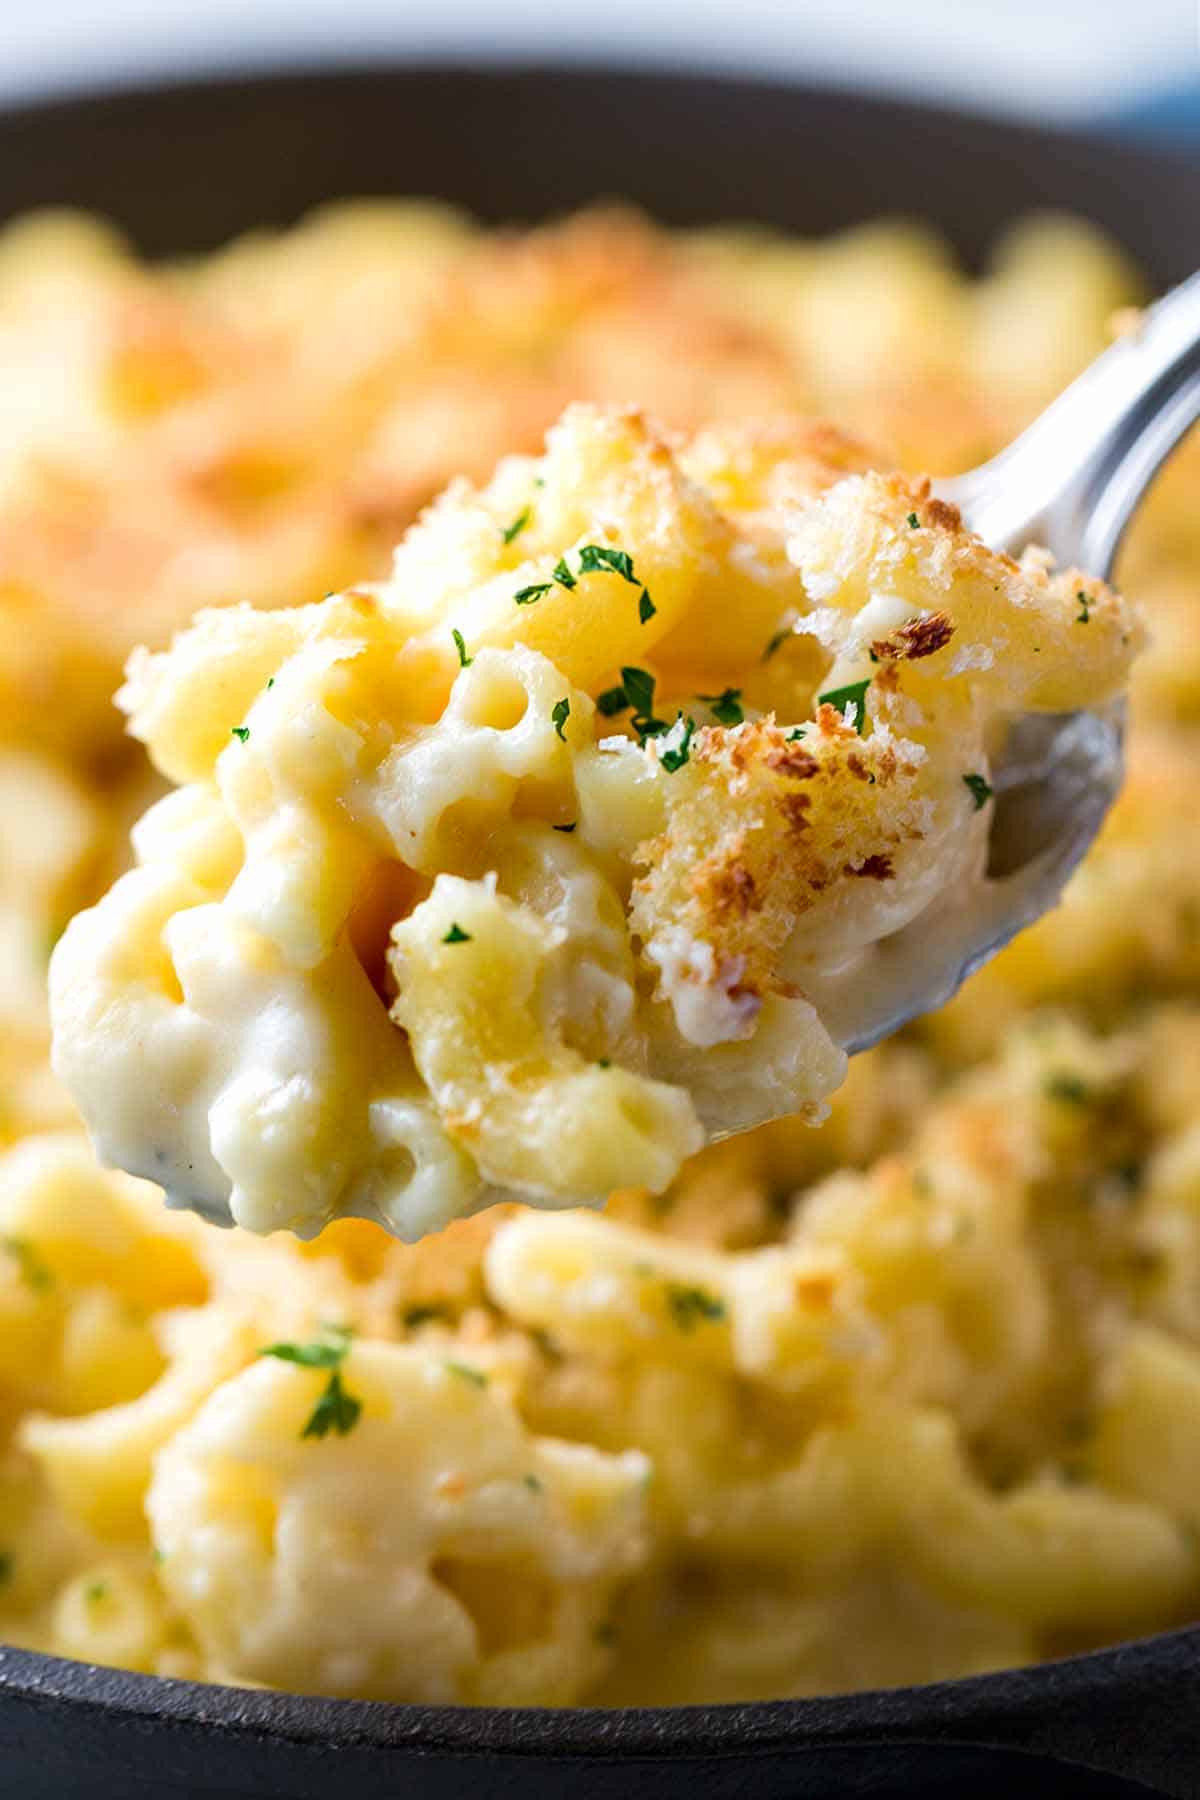 Recipes For Baked Macaroni And Cheese With Bread Crumbs
 Baked Macaroni and Cheese with Bread Crumb Topping